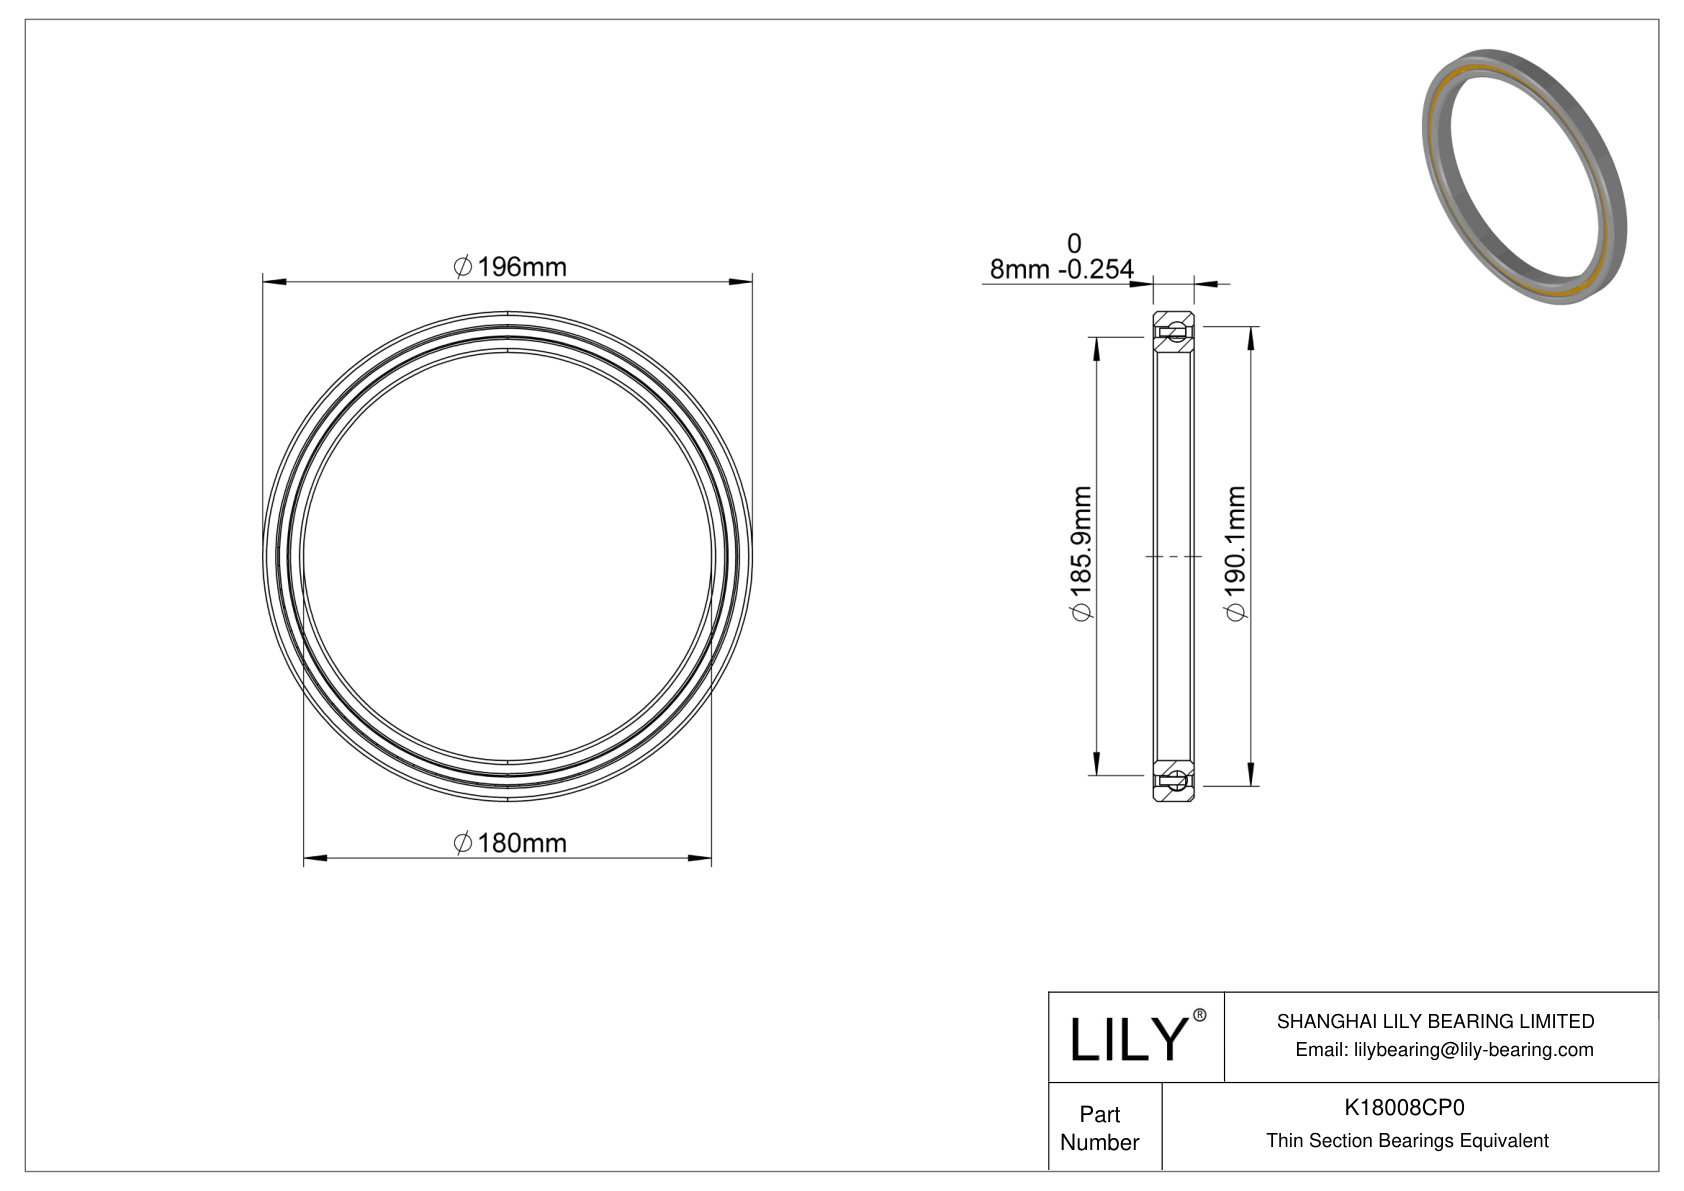 K18008CP0 Constant Section (CS) Bearings cad drawing